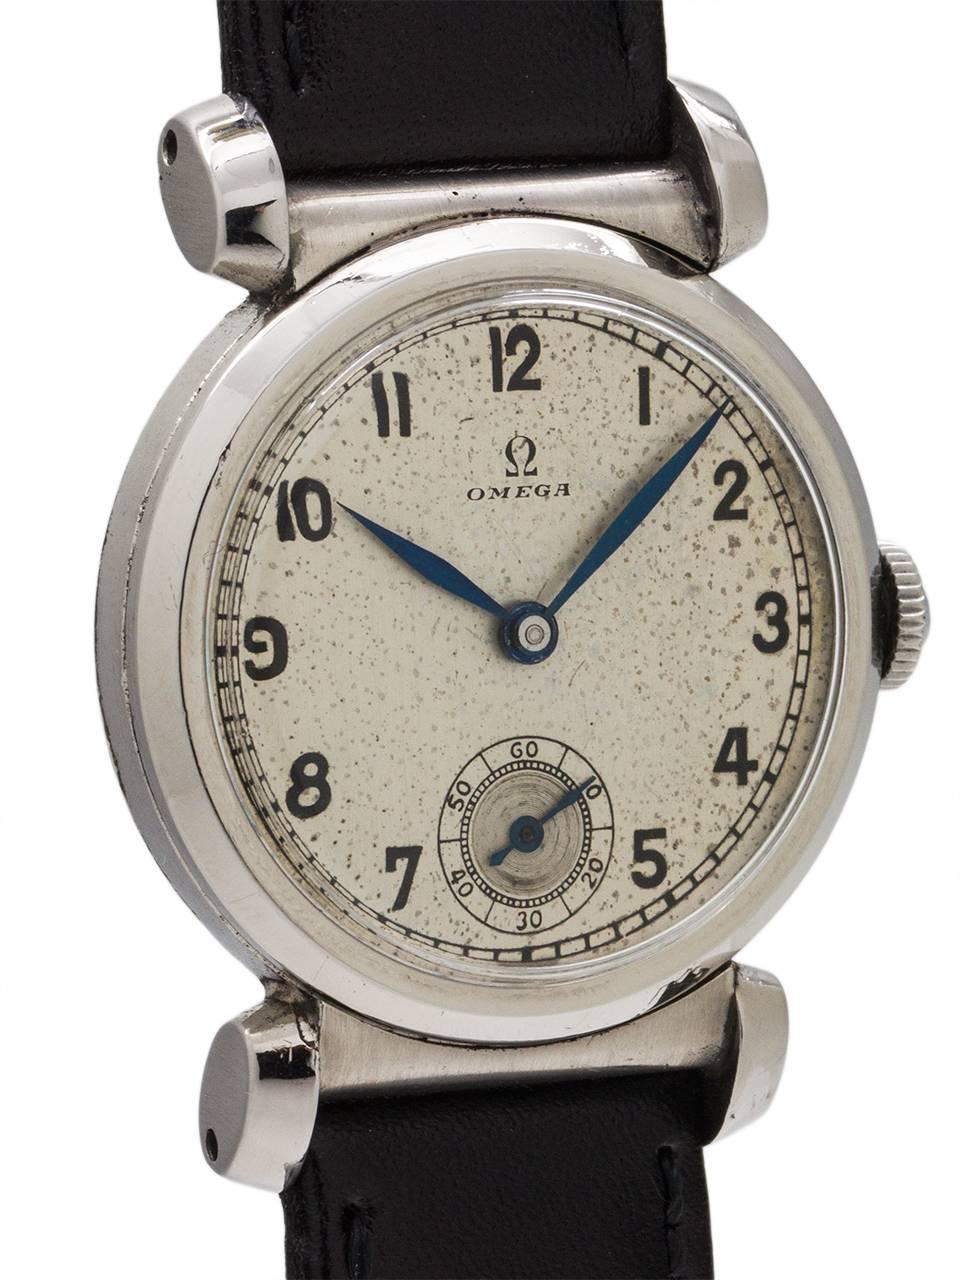 
Vintage Omega military style manual wind model movement serial# 9 million circa 1926. Featuring a 32mm diameter stainless steel case with wonderful hooded lugs on either side of a fixed end link. With original silver dial, now patina’d with a warm